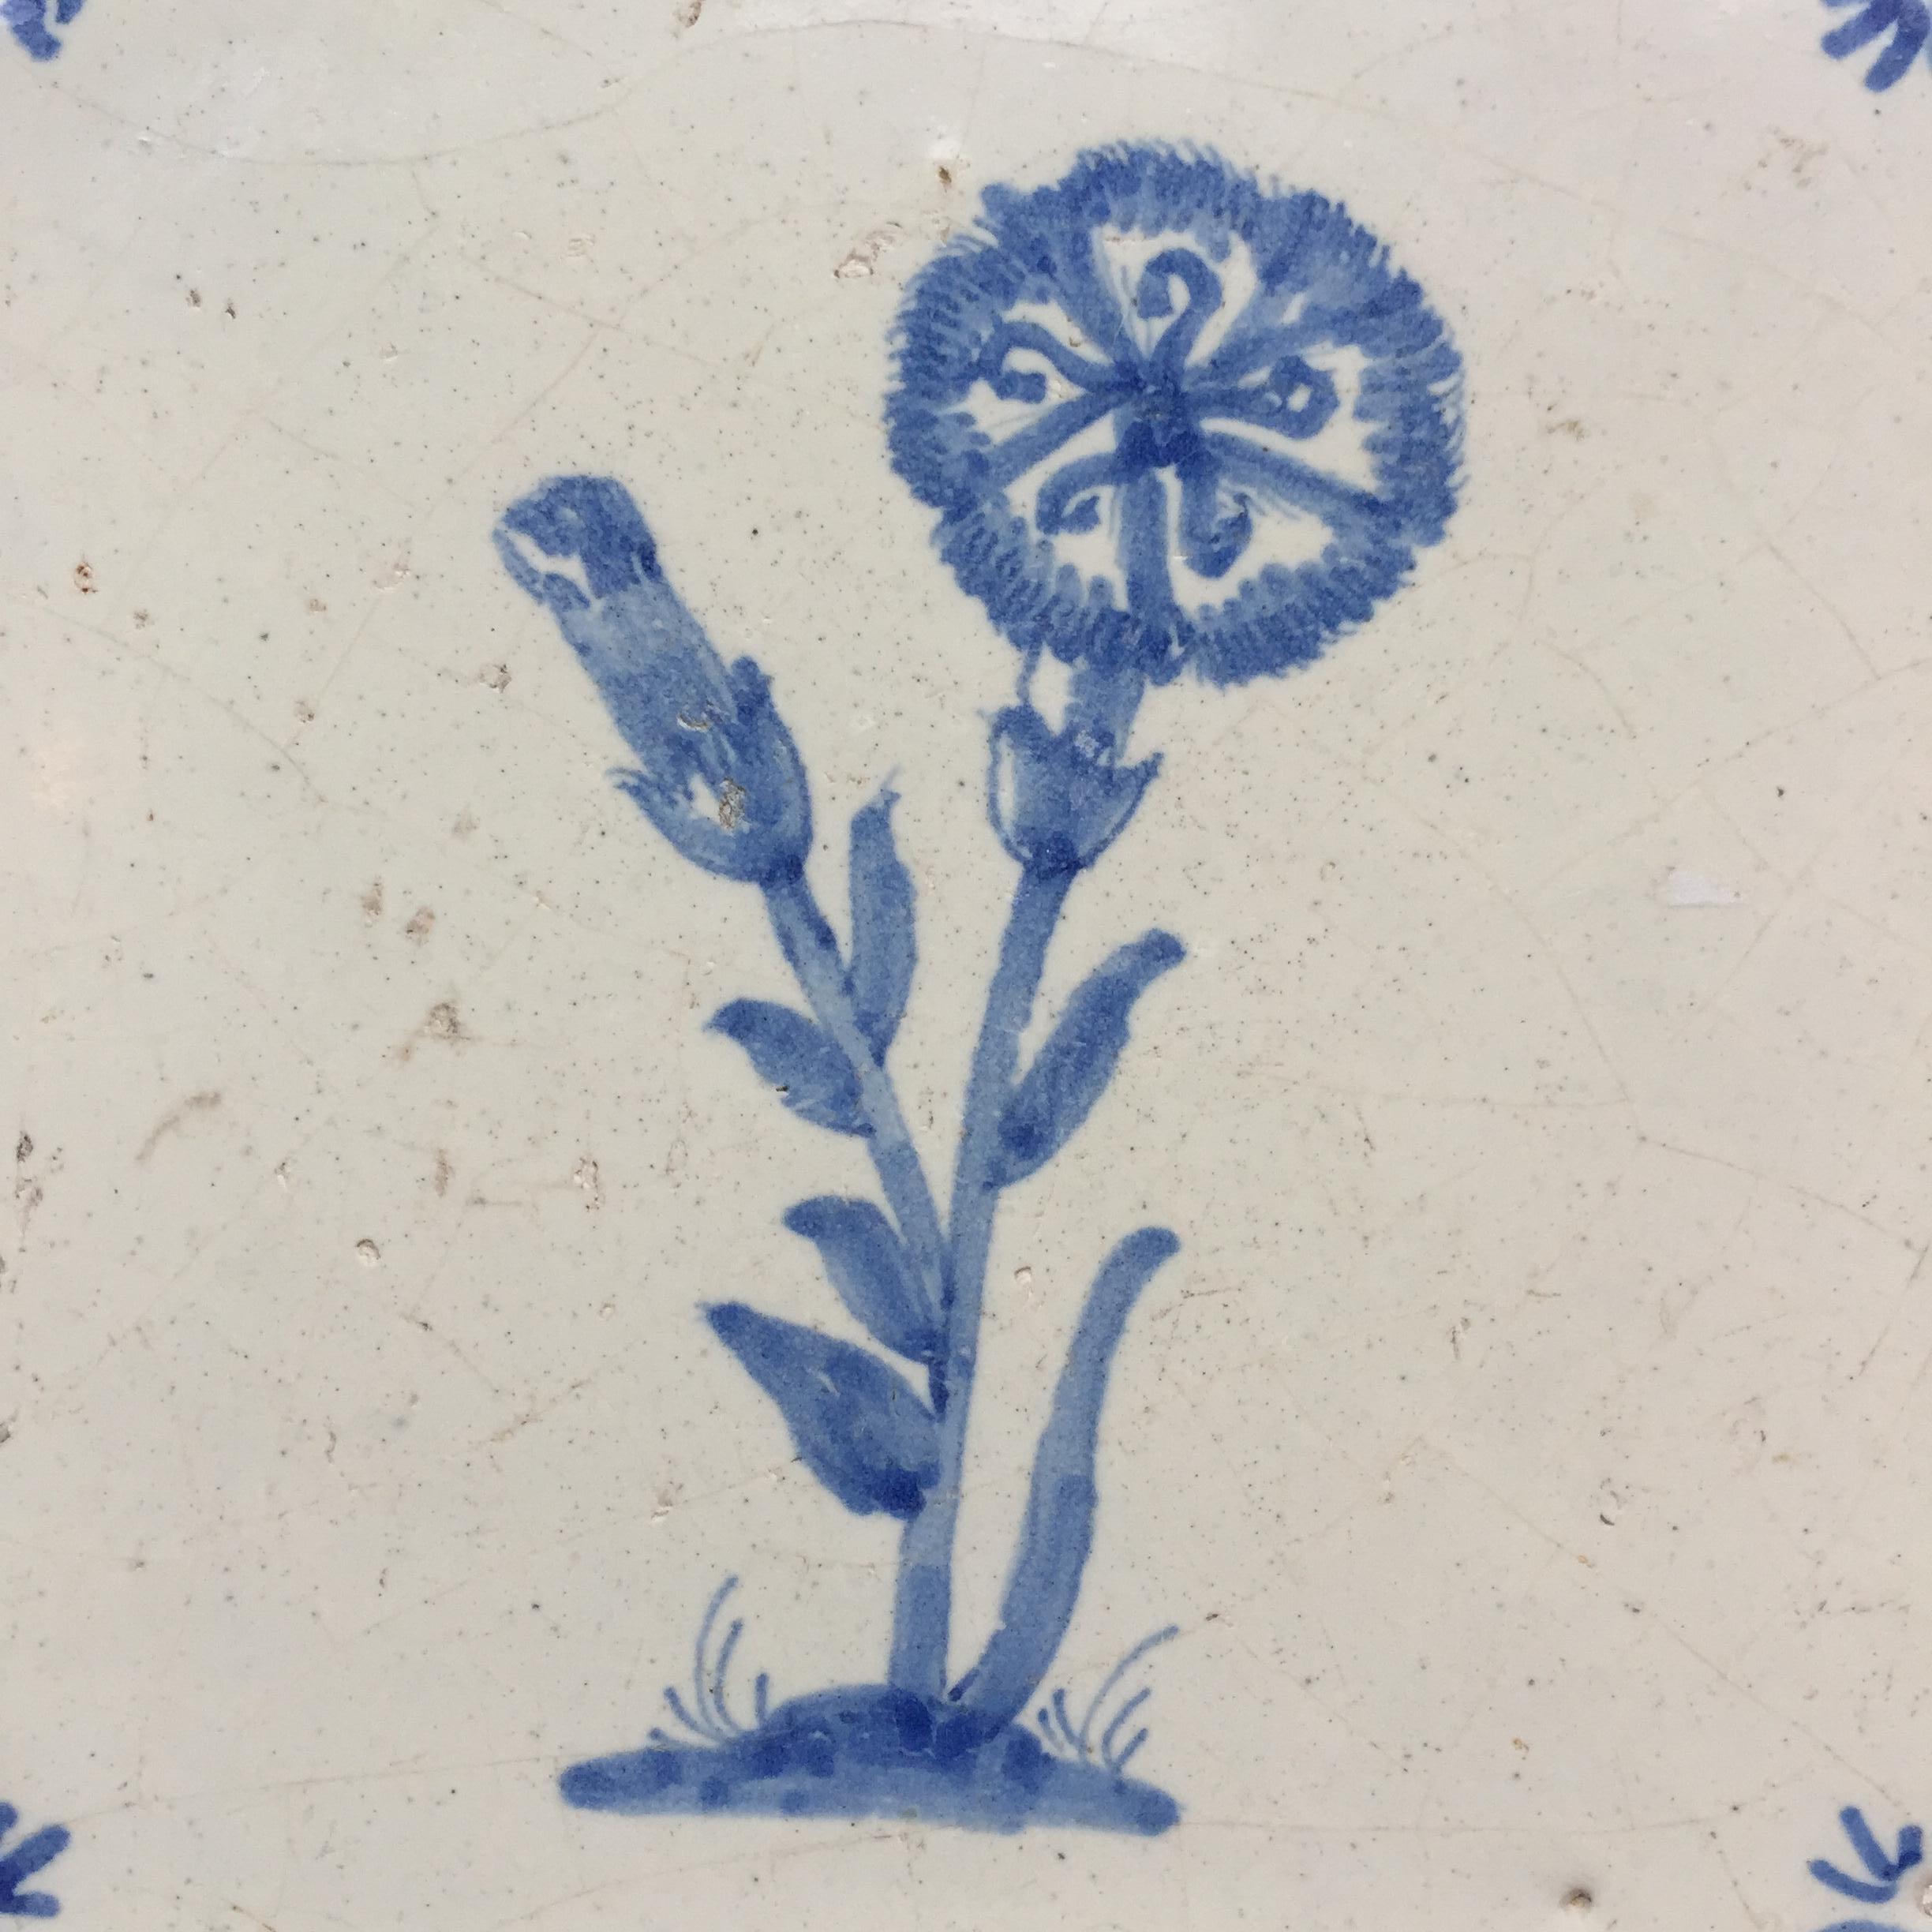 The Netherlands
Circa 1660 – 1680

A blue and white Dutch tile with the decoration of two carnations. One in the bud and one in bloom.
With small oxheads as corner decoration.

The tile is in very good condition, with the normal superficial wear and